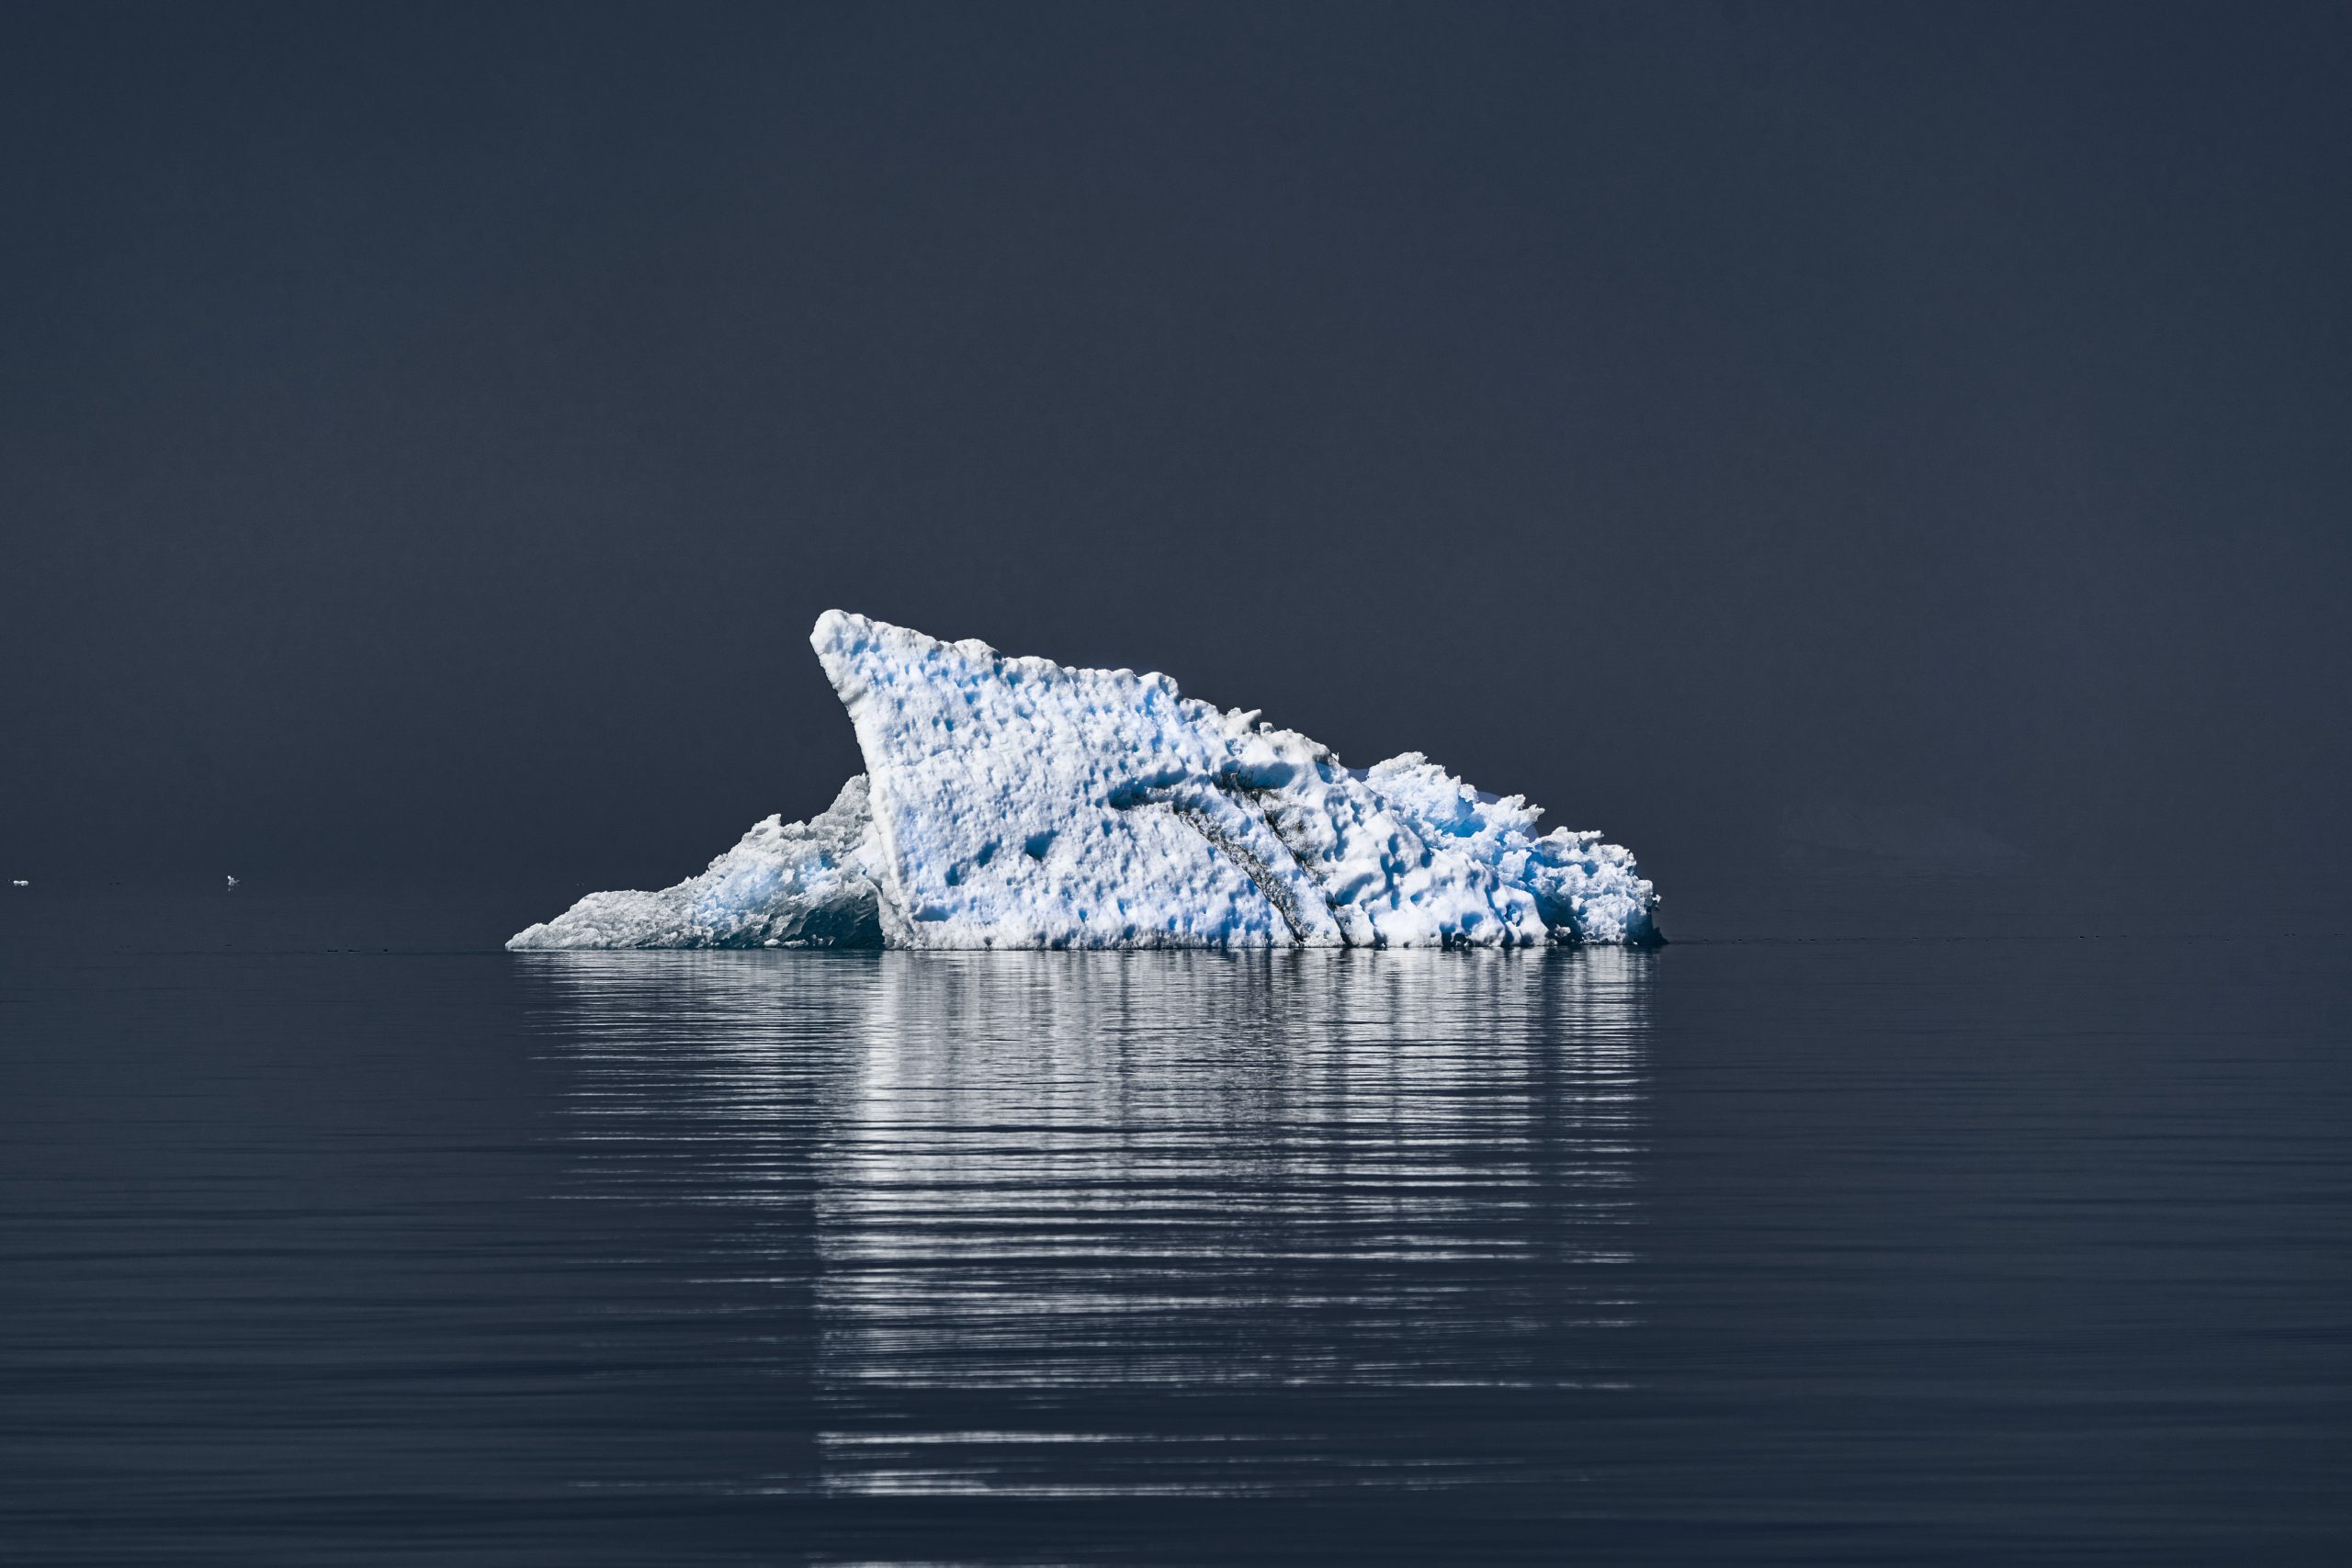 Global warming is a serious problem and glaciers are melting – listen to songs about it